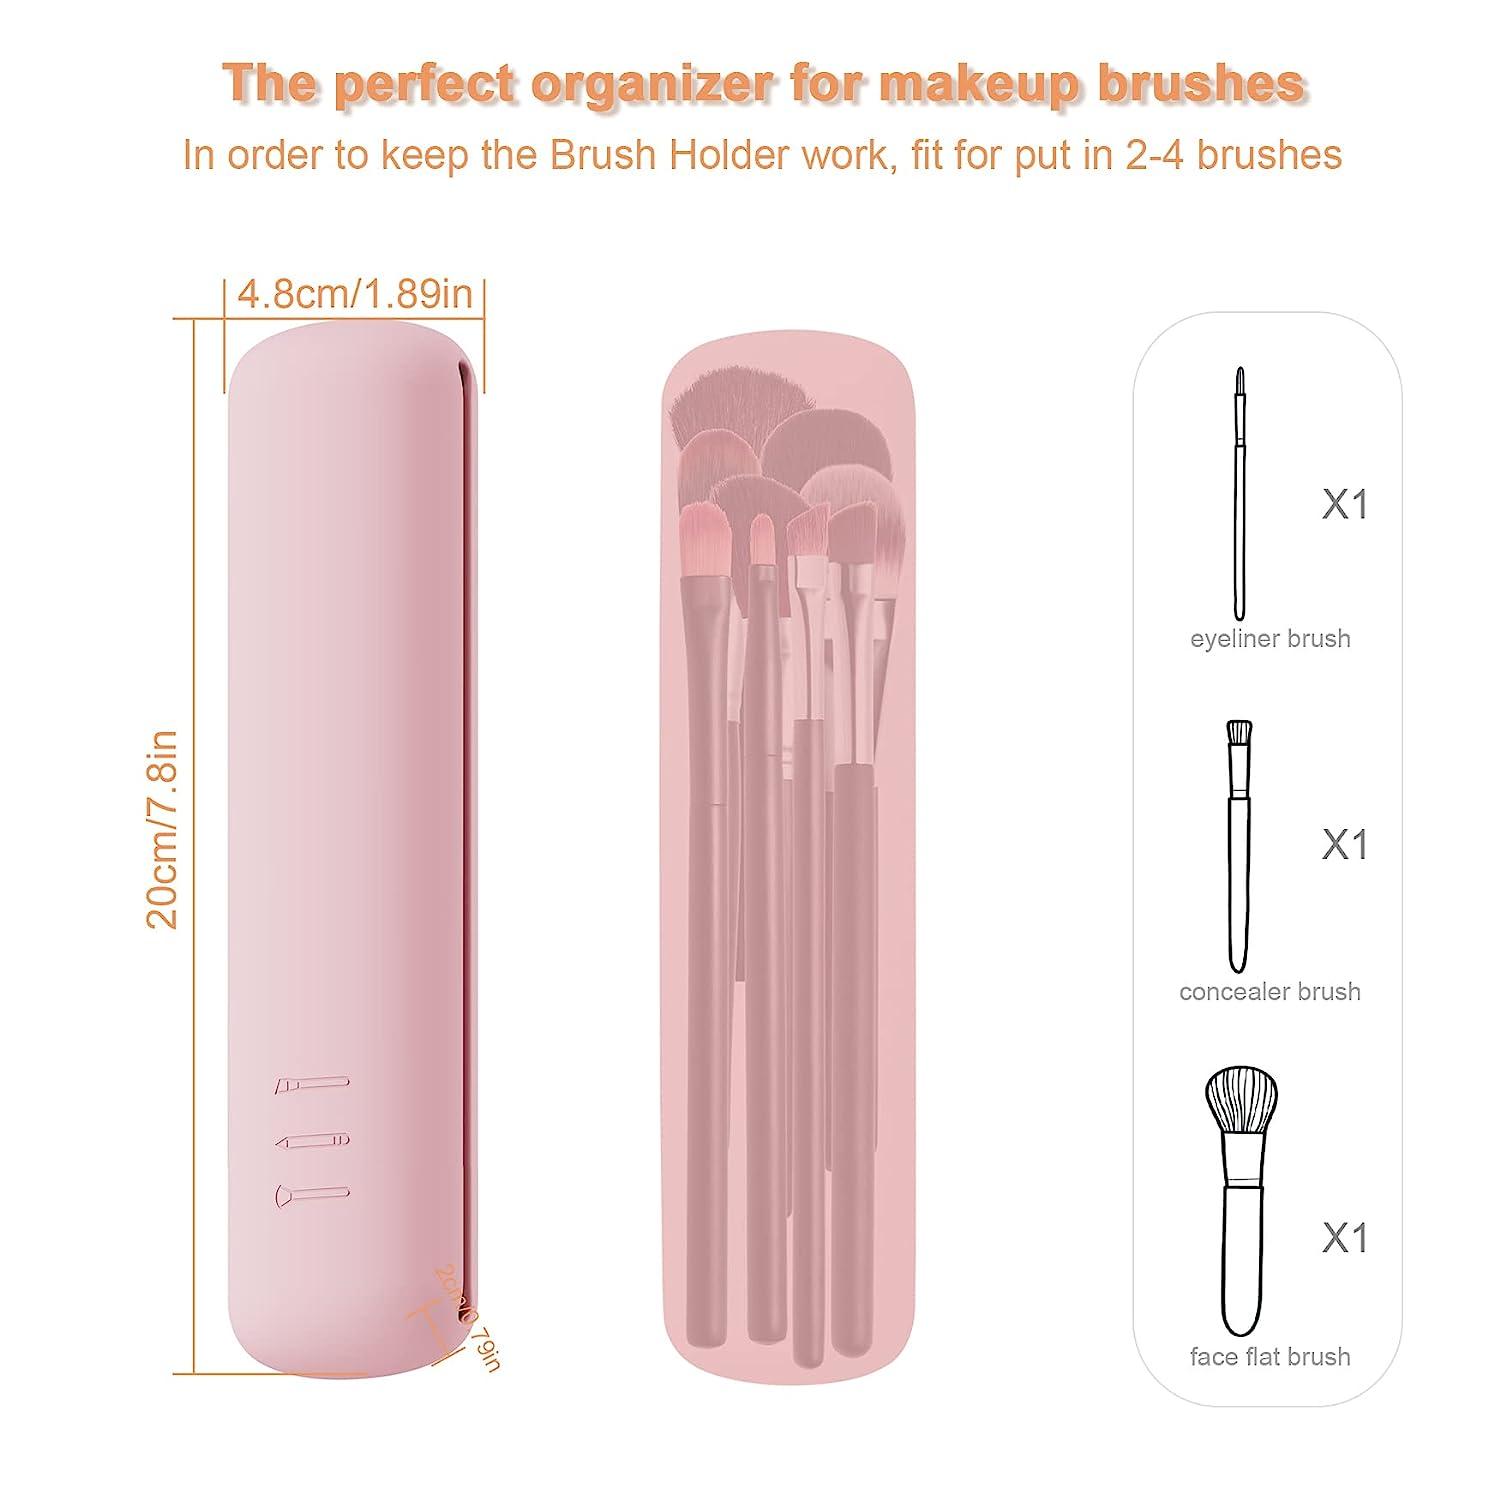 FERYES Travel Makeup Brush Holder, Magnetic Anti-fall Out Silicon Portable  Cosmetic Face Brushes Holder, Soft and Sleek Makeup Tools Organizer for